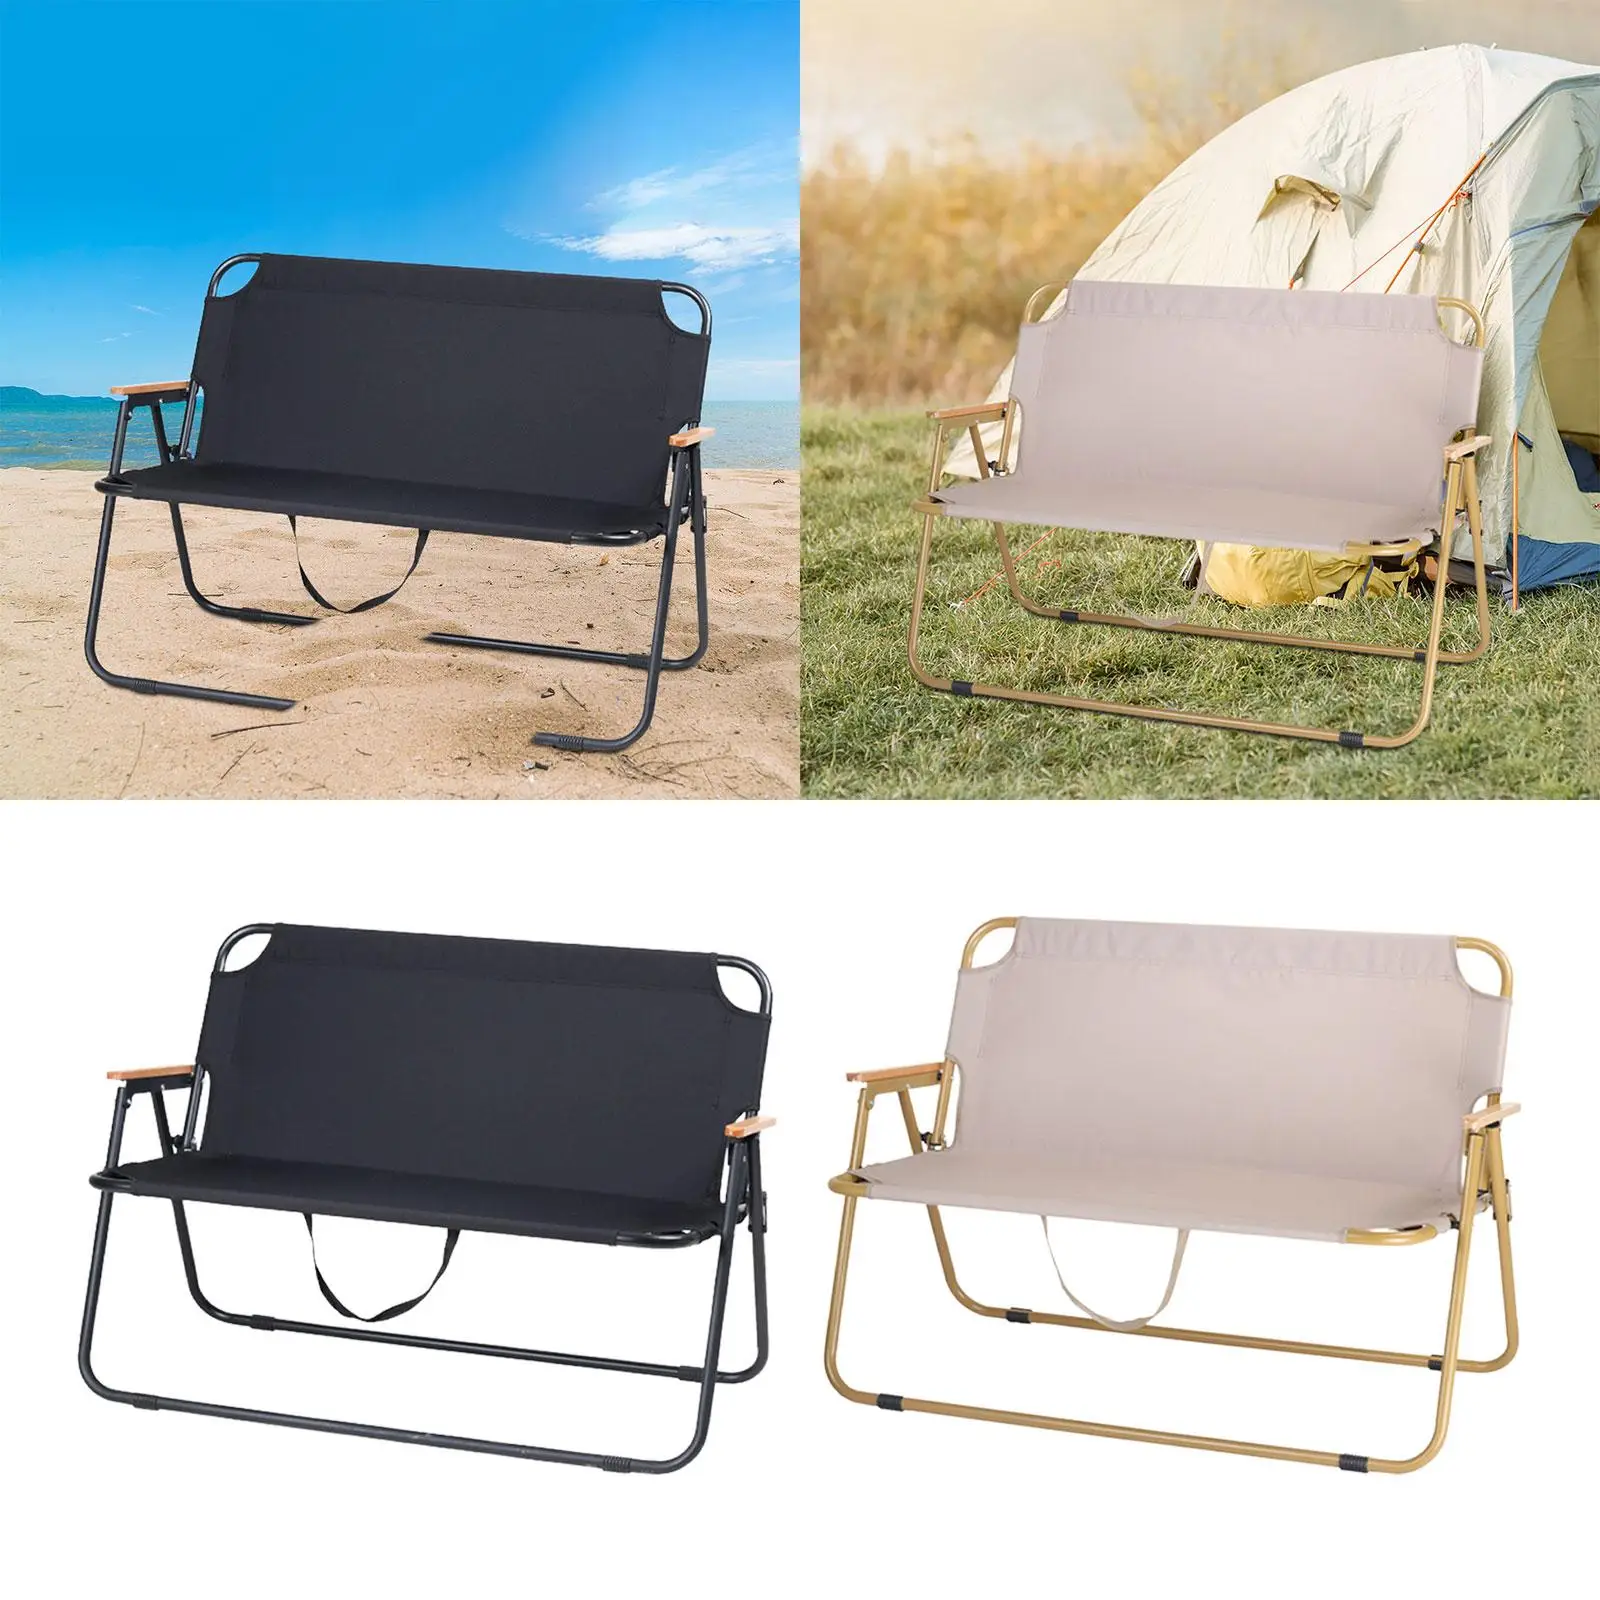 Folding Camping Chair Lightweight Camping Stool Chair Double Chair Backpacking Travel Outside Camp Chair Beach Chair Armchair